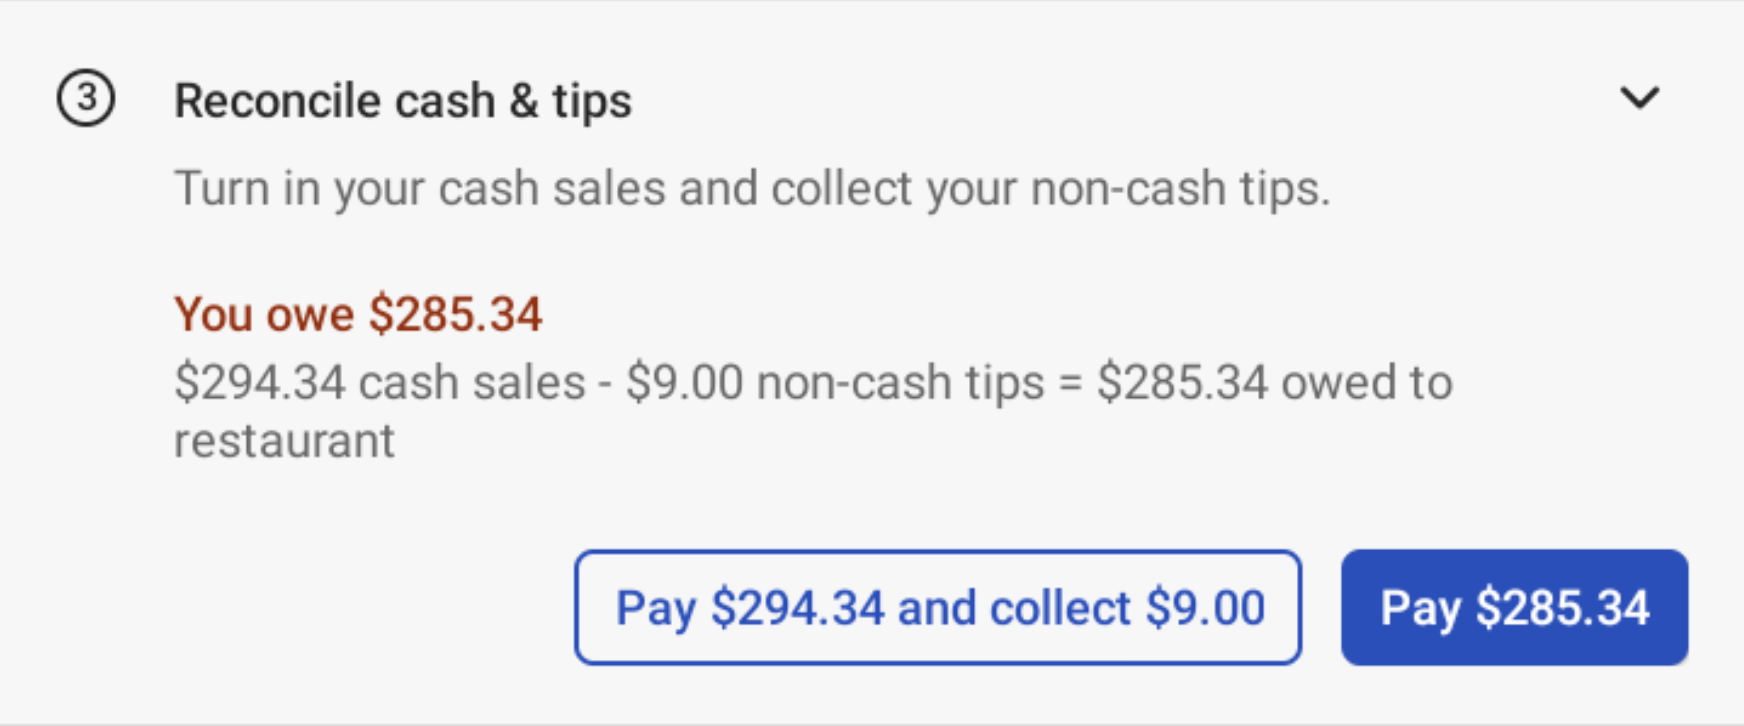 The Reconcile cash & tips step showing total to pay and collect or pay.